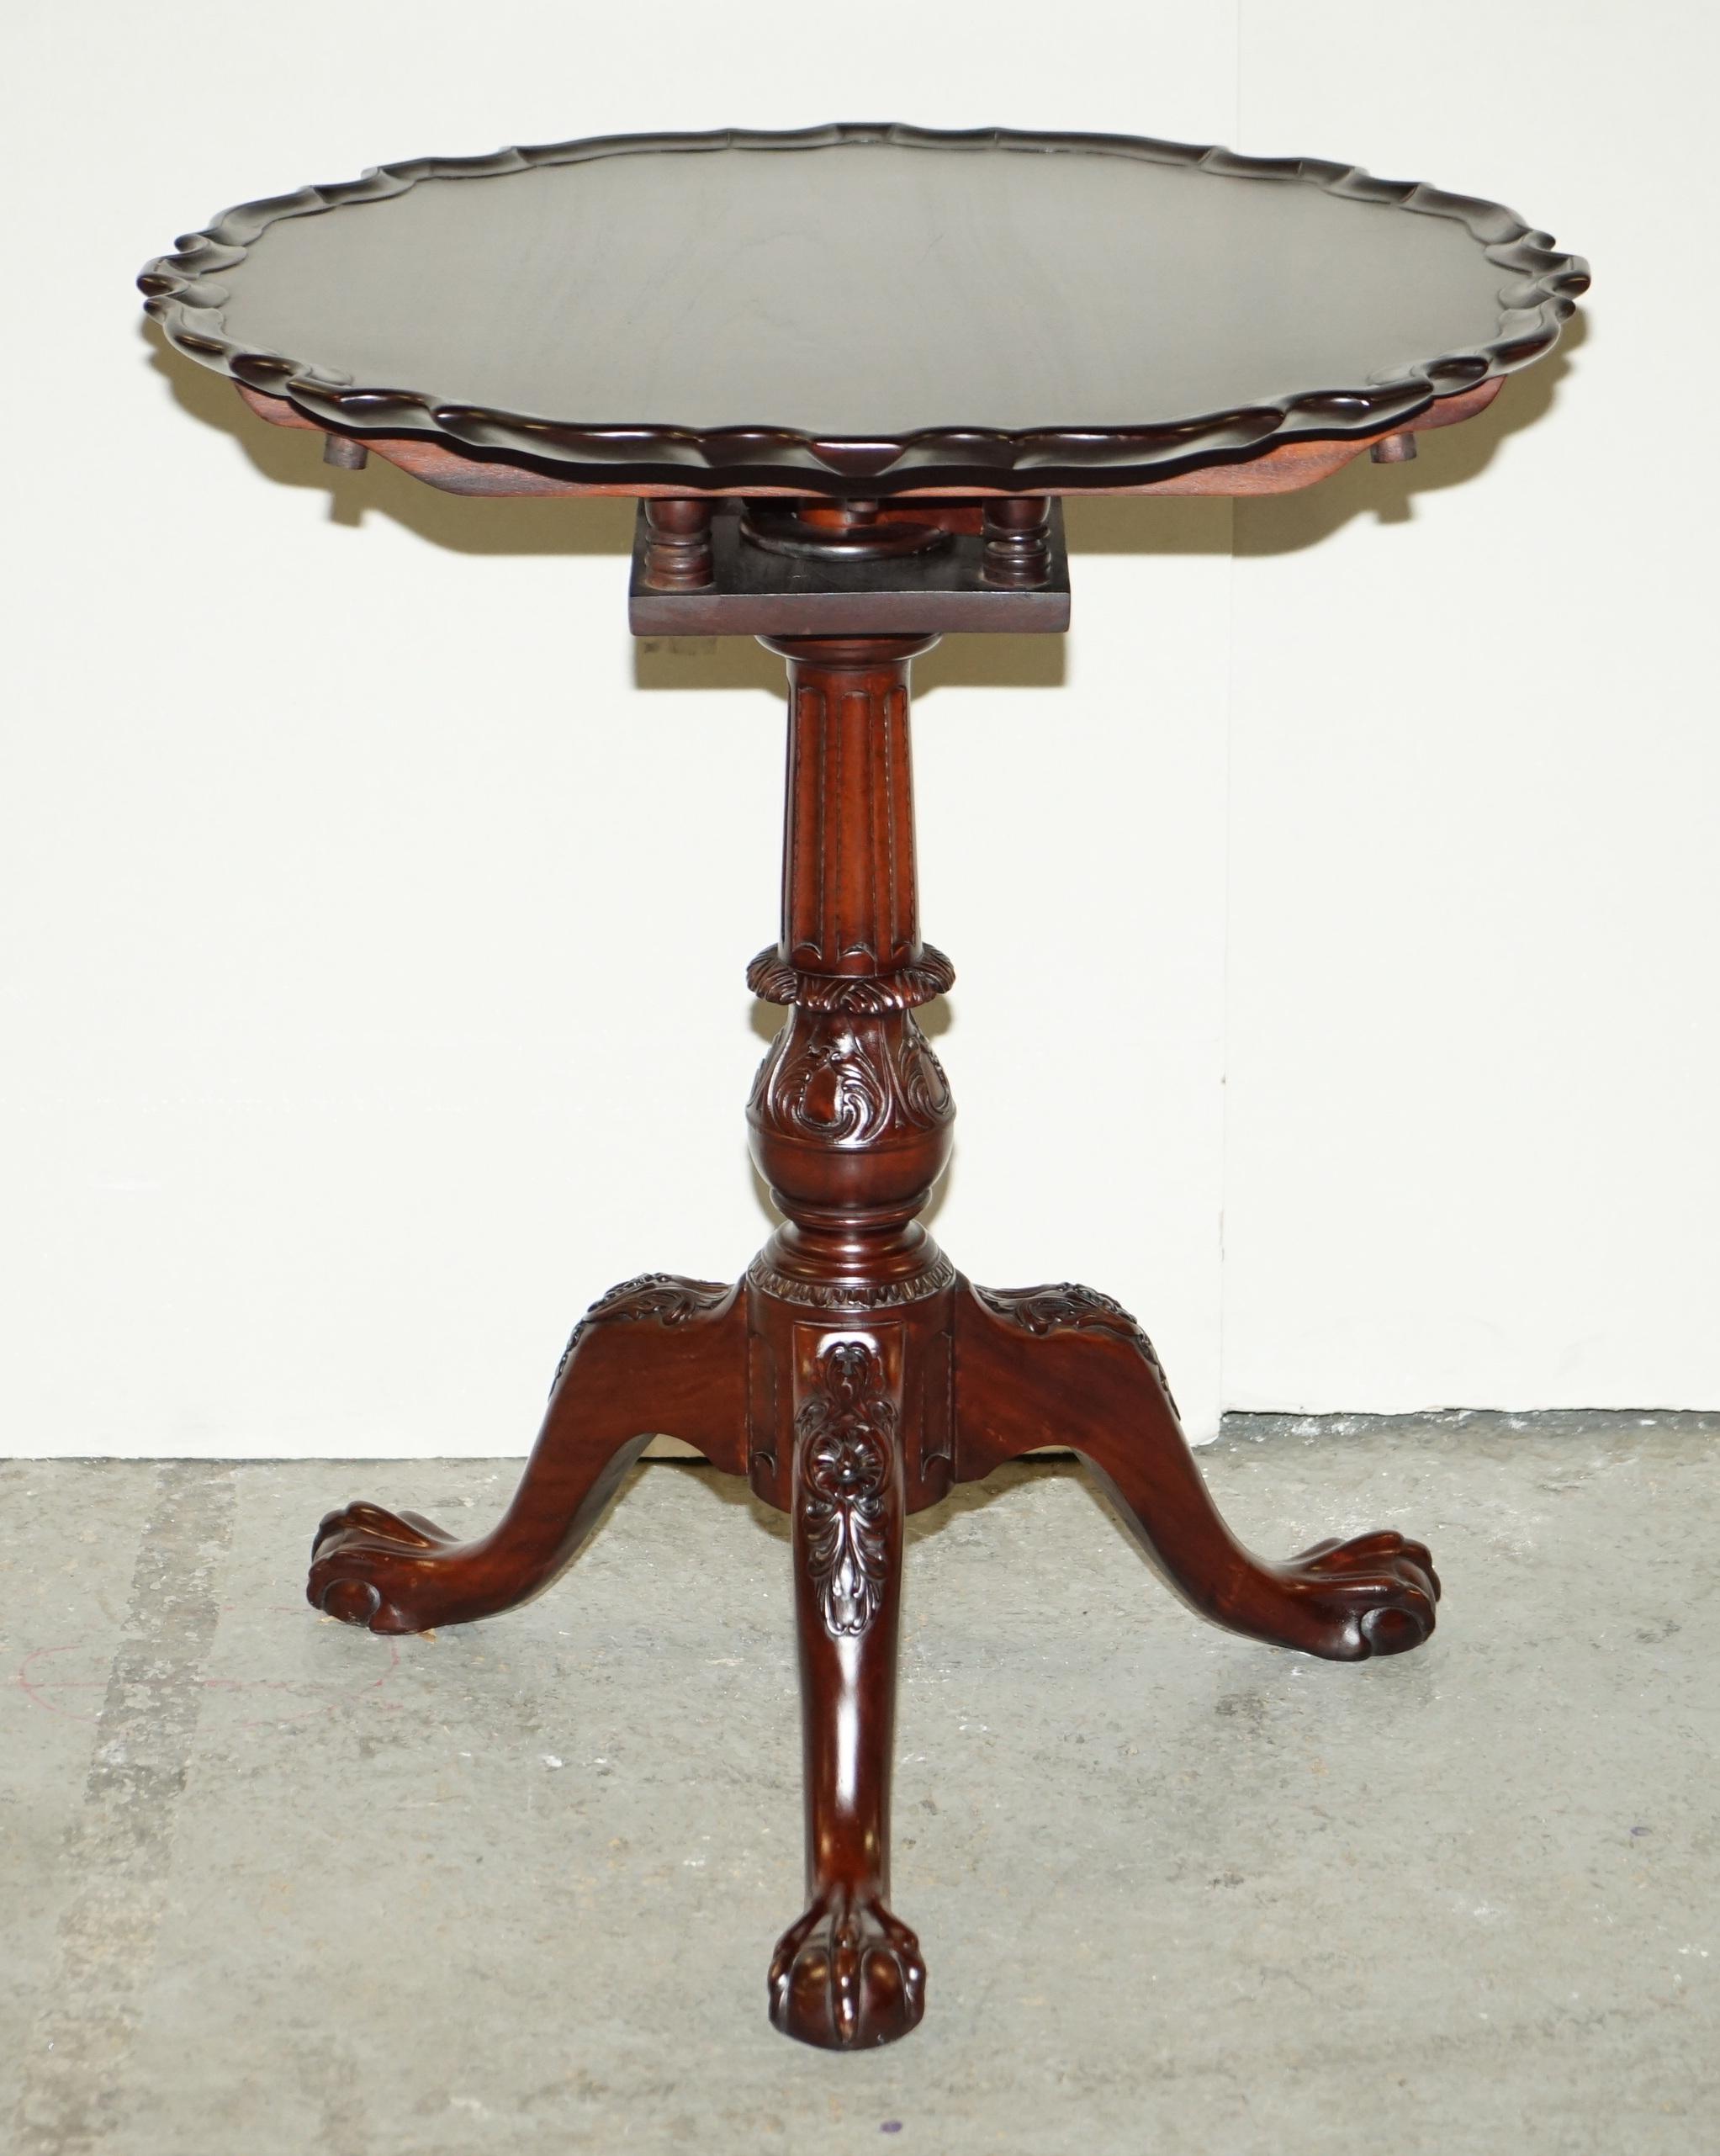 Here we have for sale a lovely Georgian-style mahogany tilt-top tripod table with a pie crust edge, bird cage support standing on claw, and ball feet with carved detailing.
Overall, the table is in good condition it has been cleaned and polished